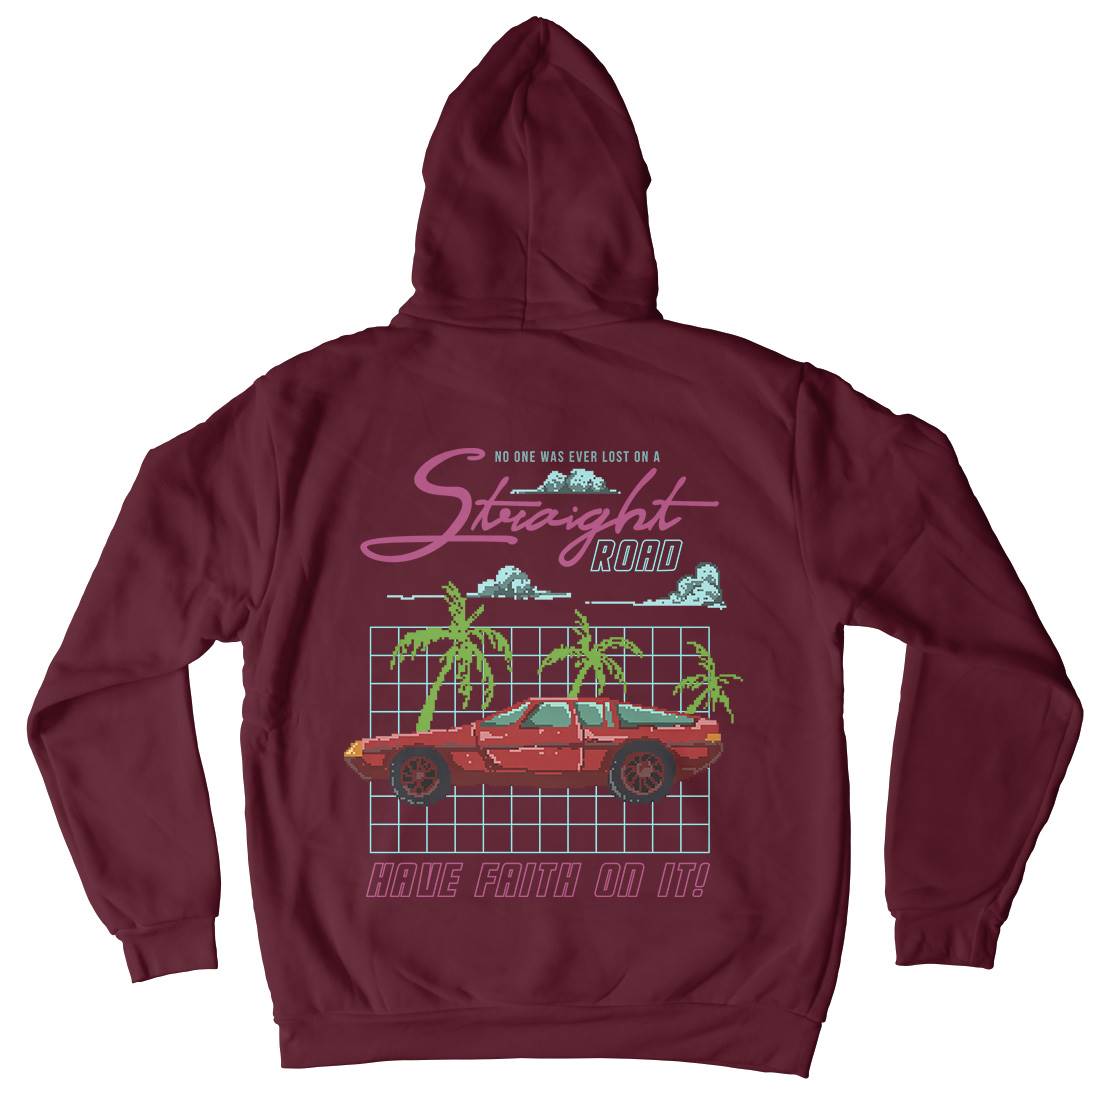 Straight Road Mens Hoodie With Pocket Cars B960